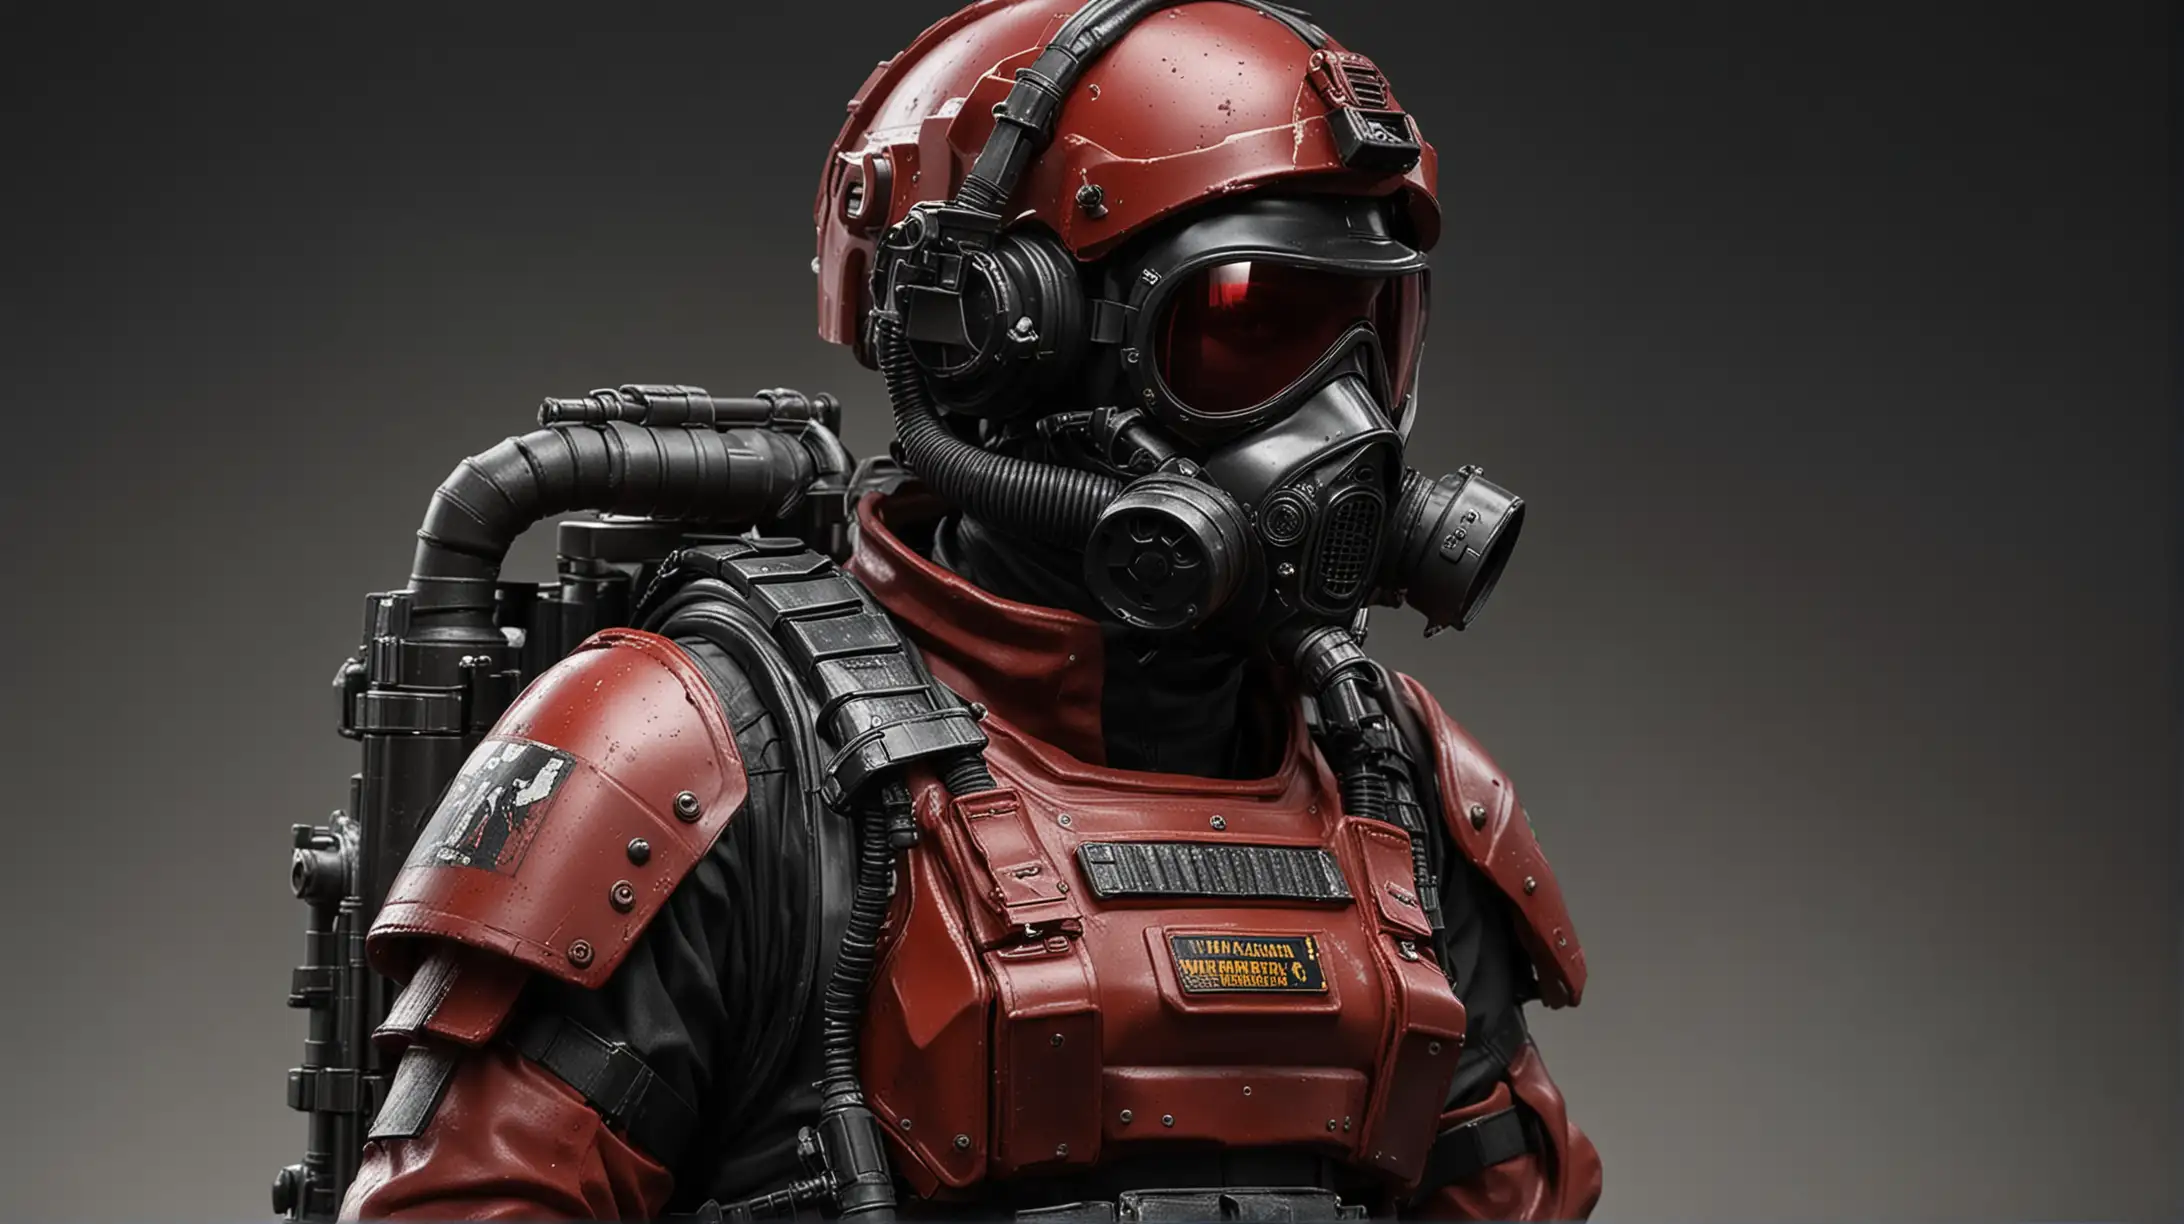 Female warhammer 40k imperial guard soldier in a closed environment suit with an smg and air tank backpack. Black, tight. Full-head helmet and gas mask. Dark red glass visor covering the eyes.
